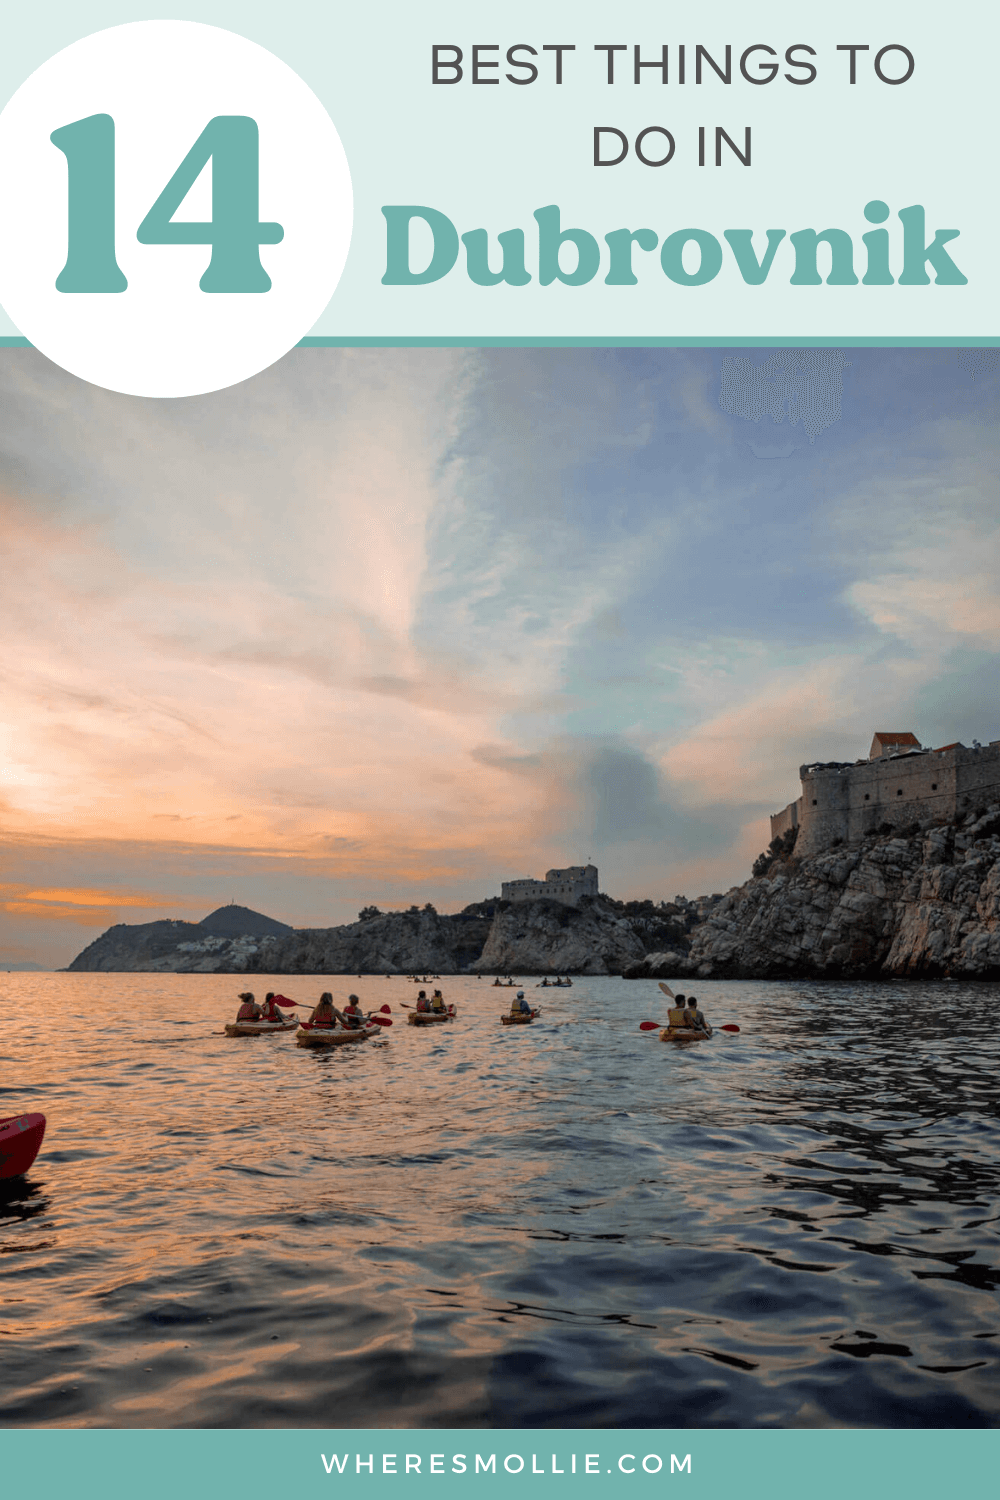 The best things to do in Dubrovnik, Croatia